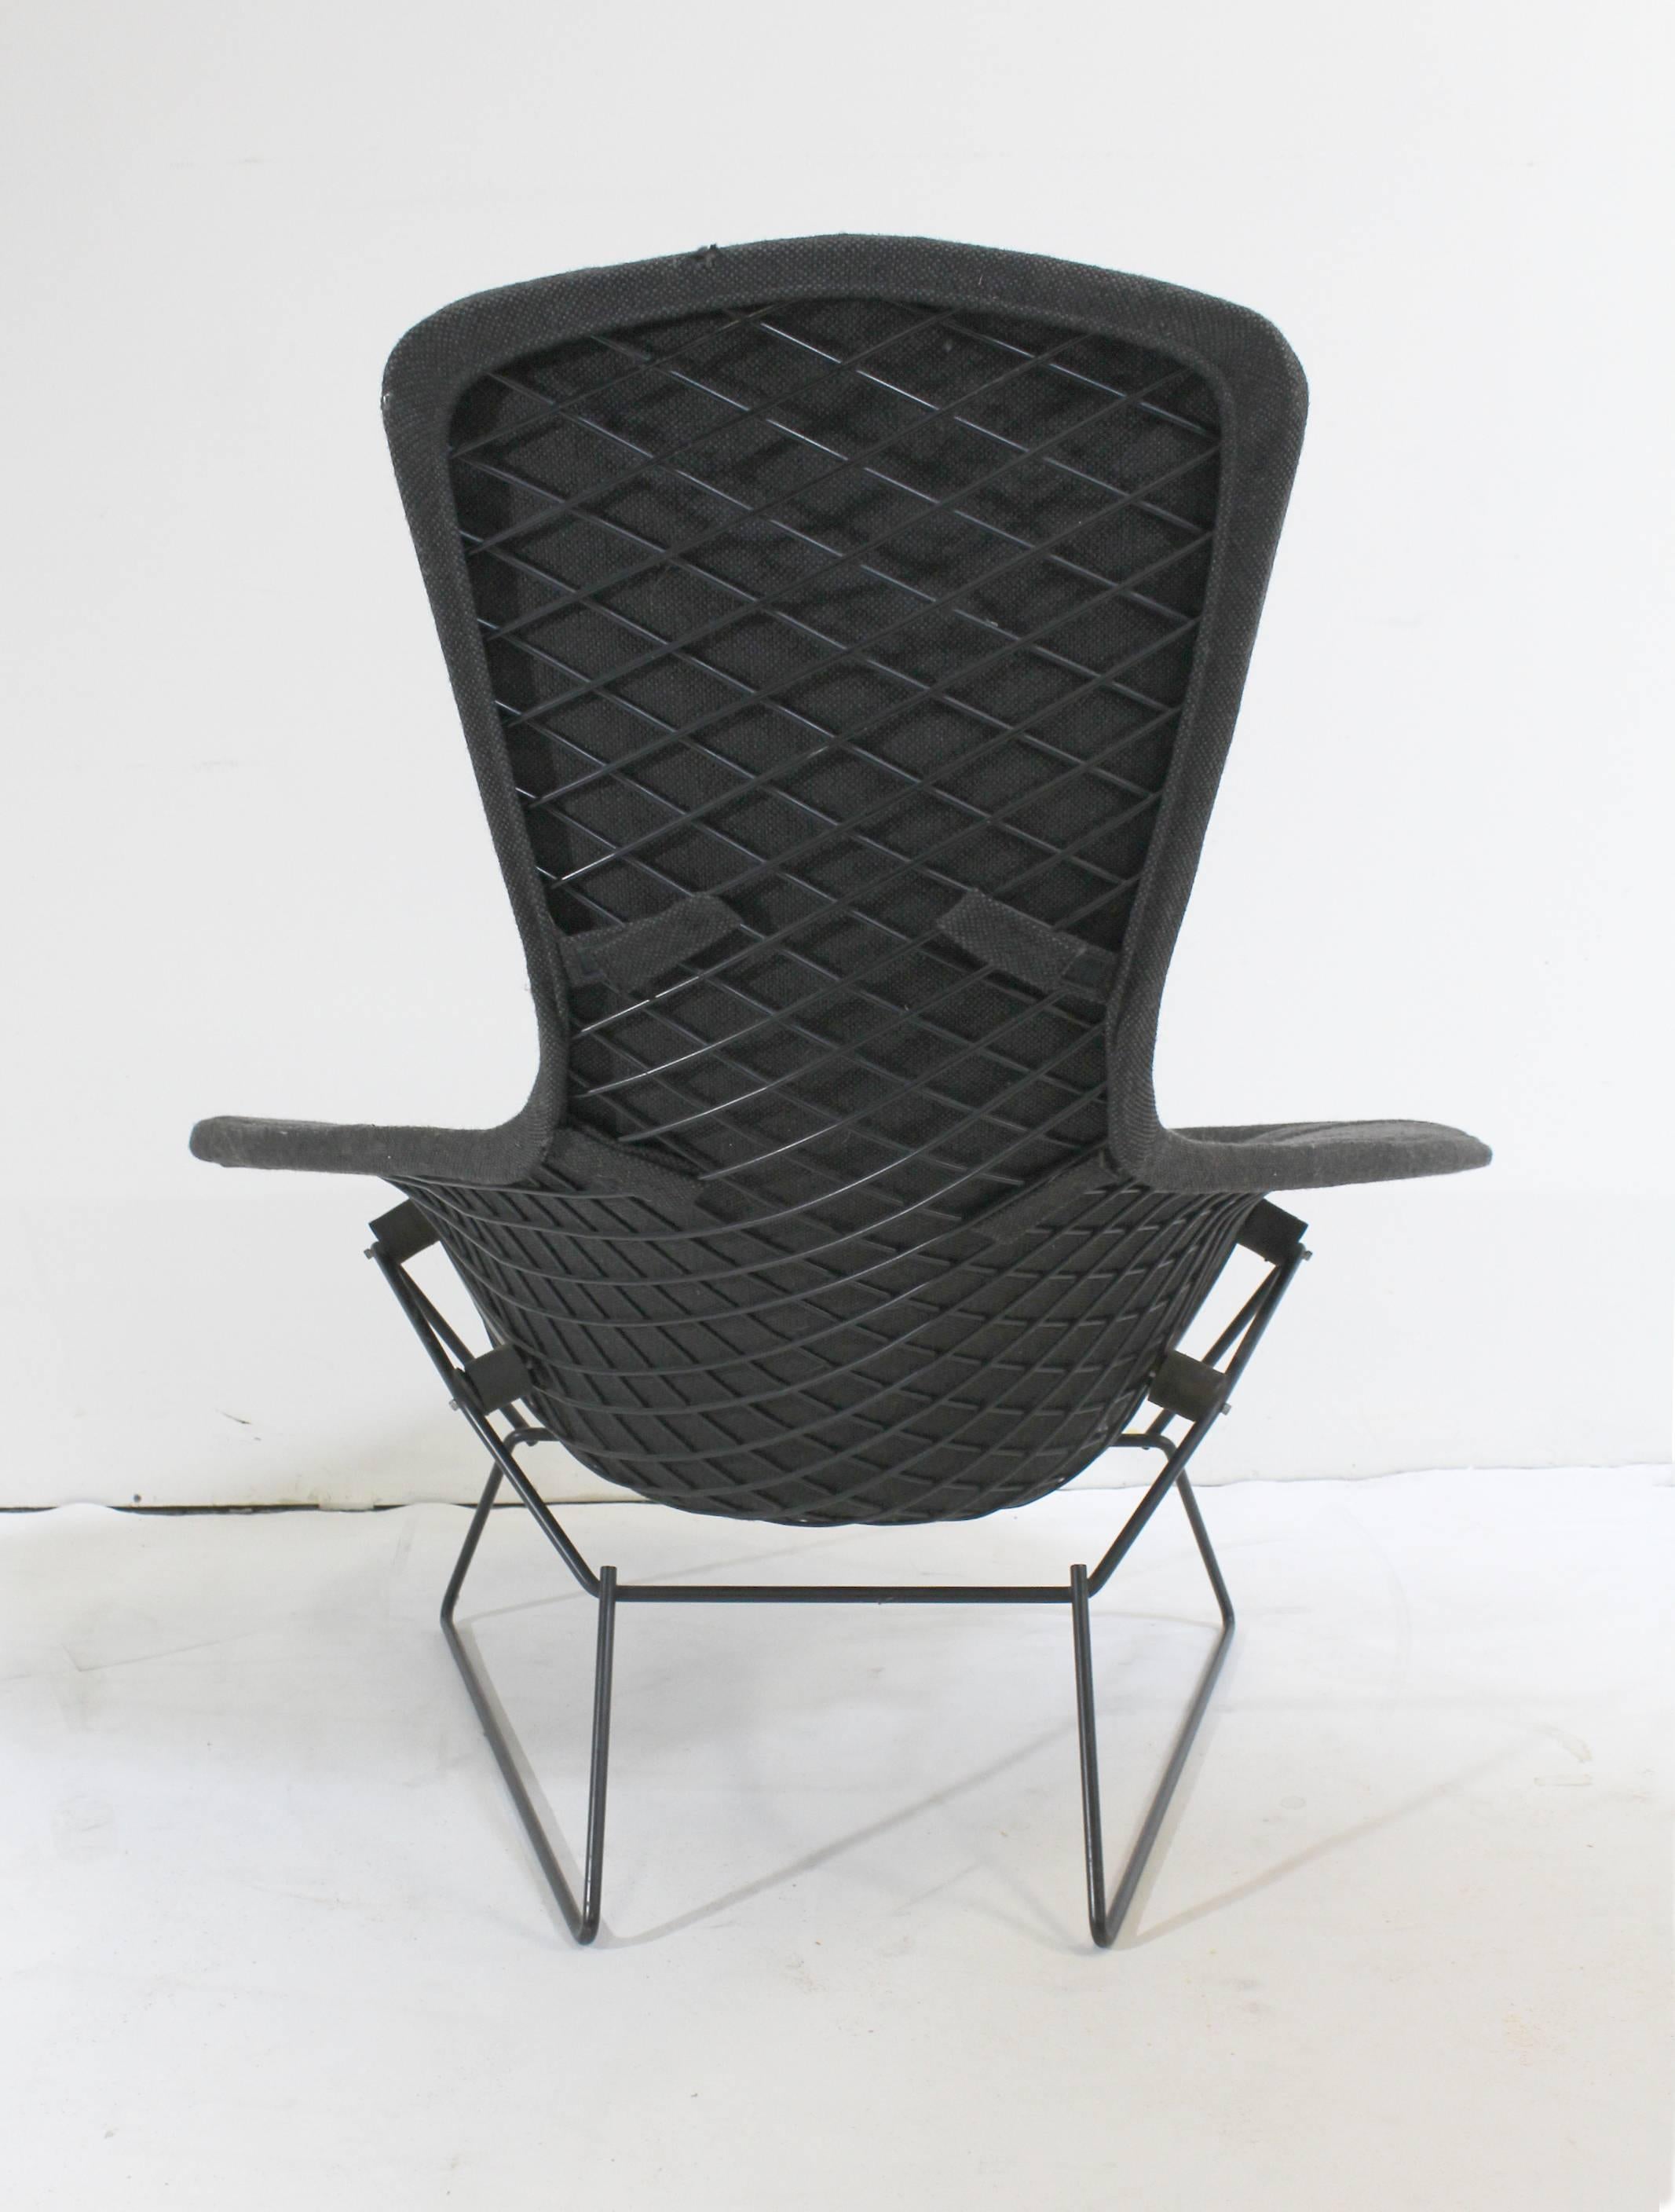 American Vintage Bird Chair and Ottoman by Harry Bertoia for Knoll